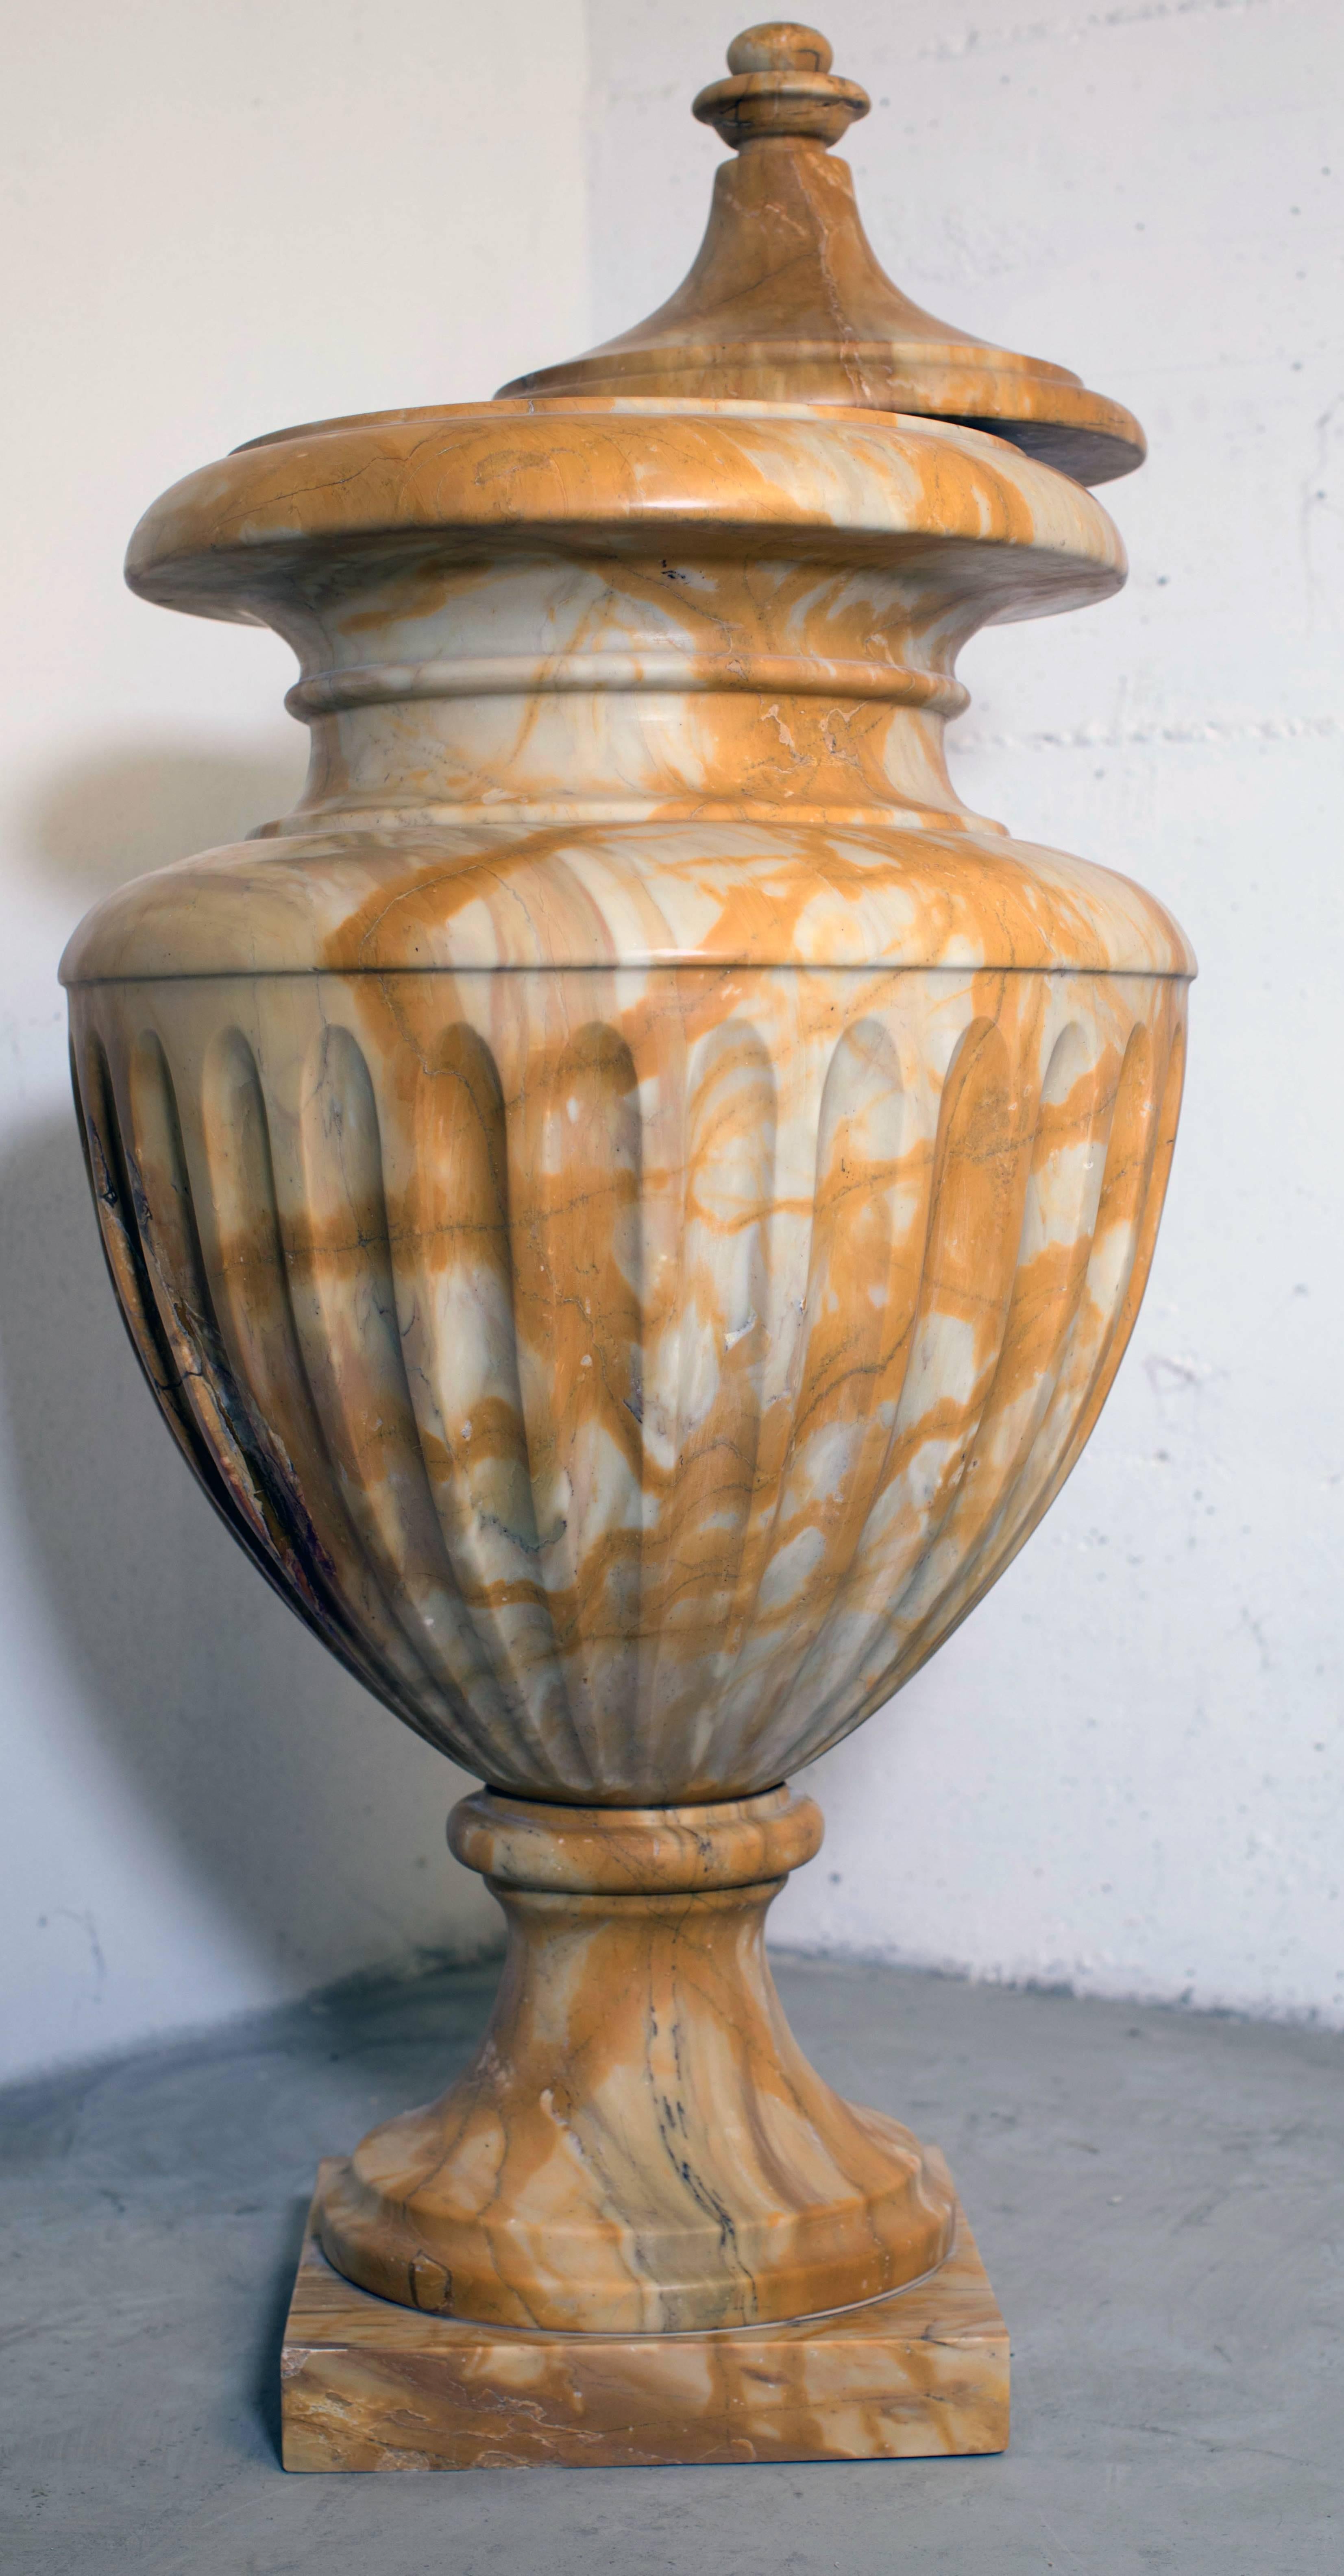 Carved 21st Century Neoclassical Italian Tuscany Siena Yellow Marble Decorative Vase For Sale